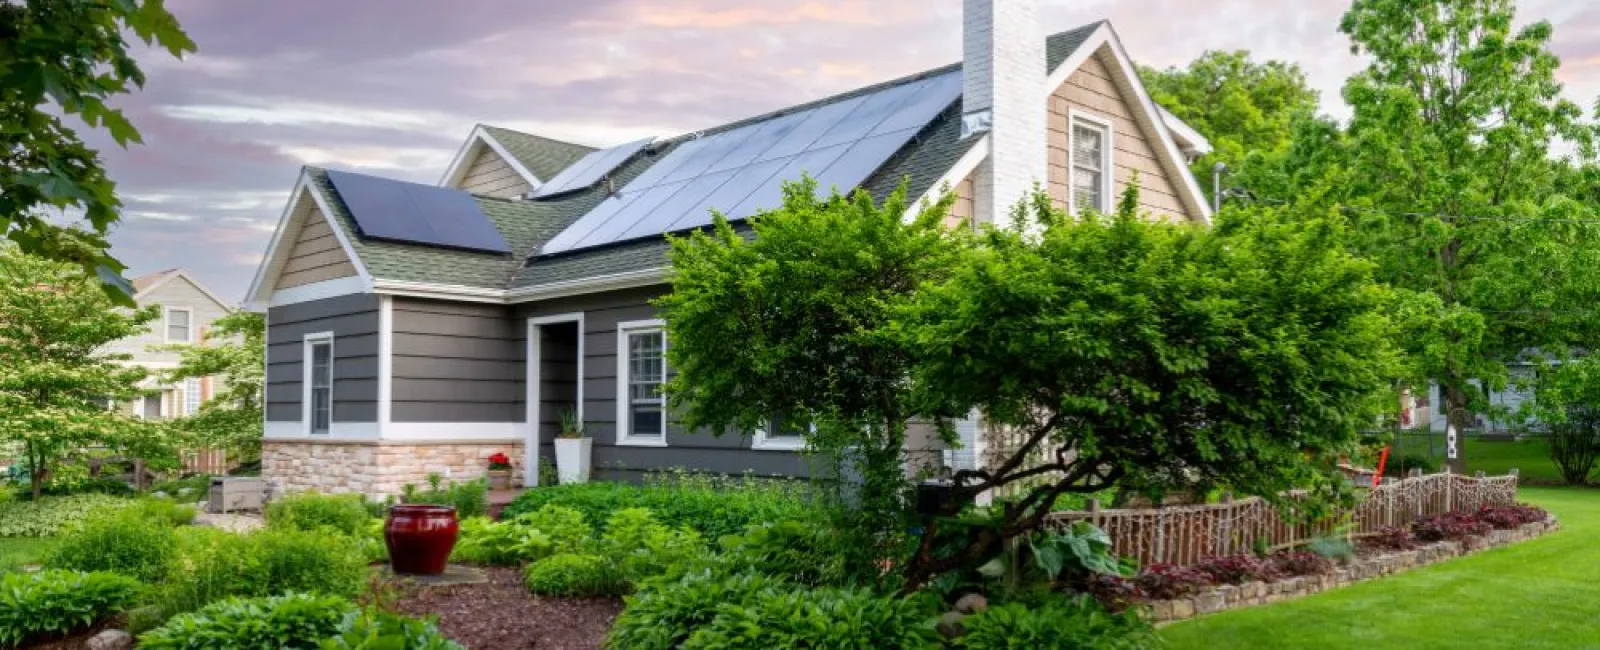 4 Effective Ways To Make Your Home More Energy Efficient